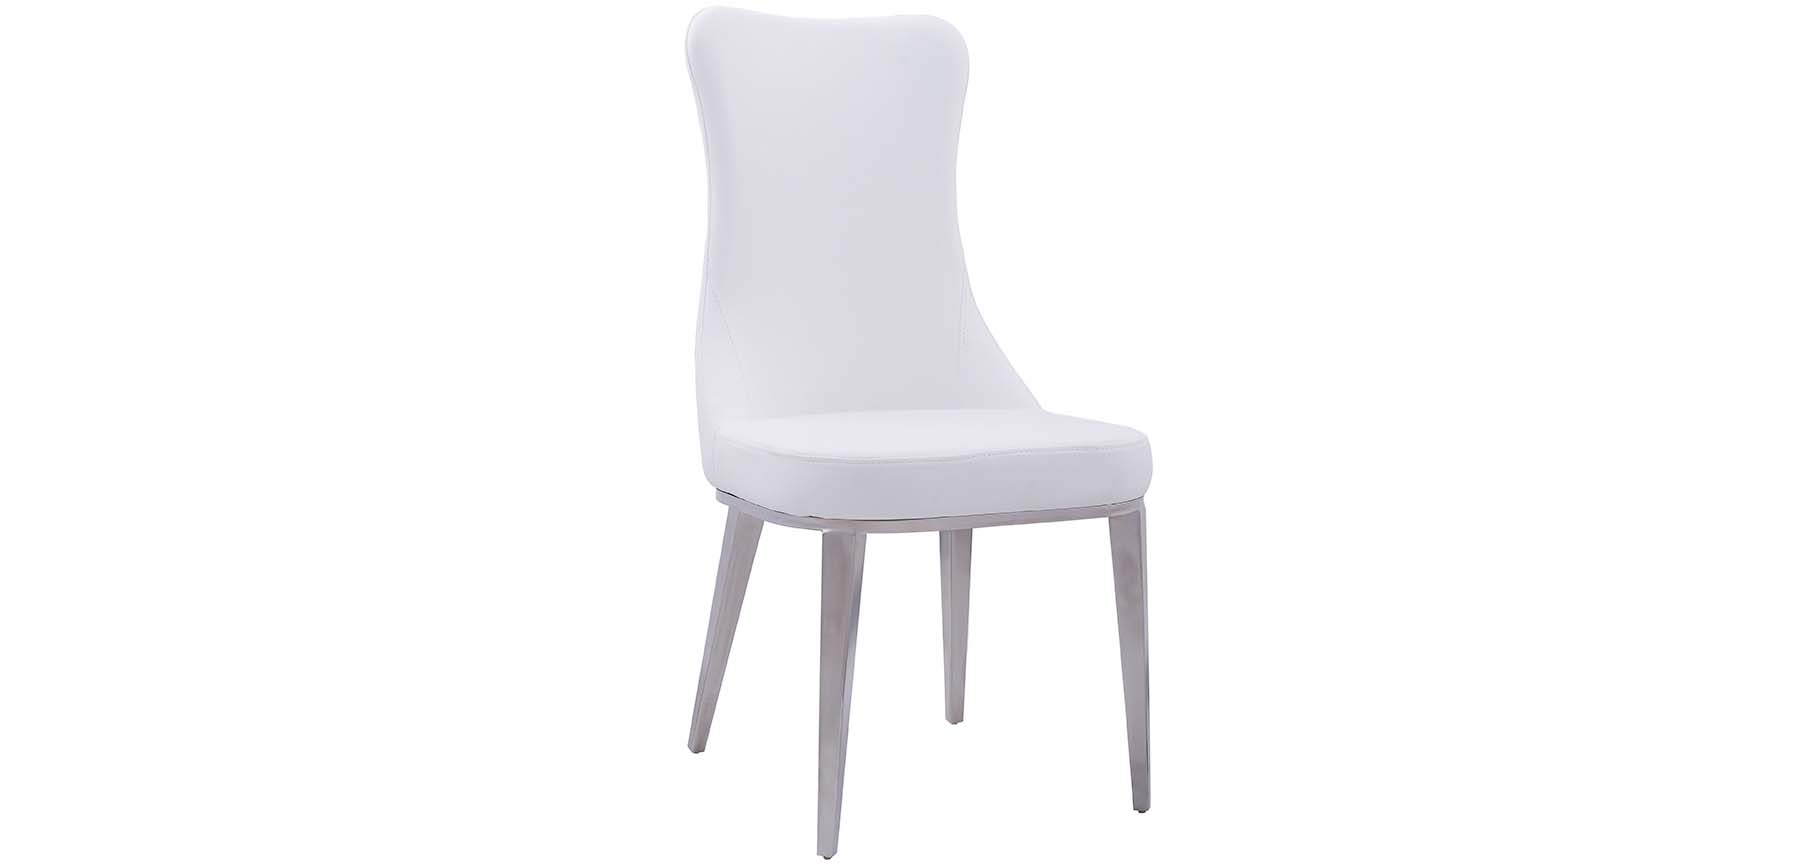 Dining Room Furniture Tables 6138 Solid White (no pattern) Chair